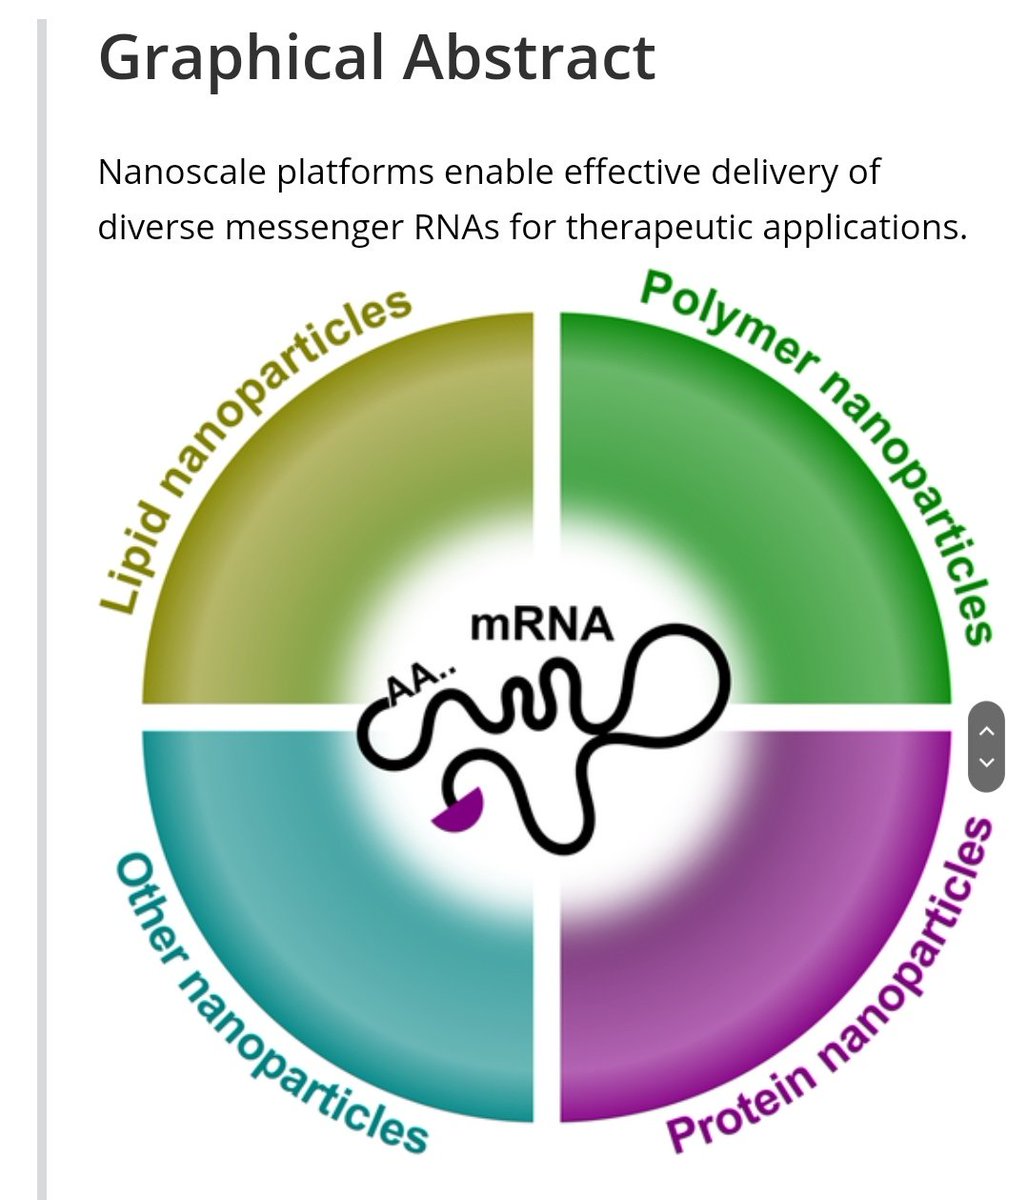 2018

Nanoscale platforms have expanded the feasibility of mRNA-based therapeutics, and enabled its potential applications to protein replacement therapy, cancer immunotherapy, therapeutic vaccines, regenerative medicine, and genome editing.